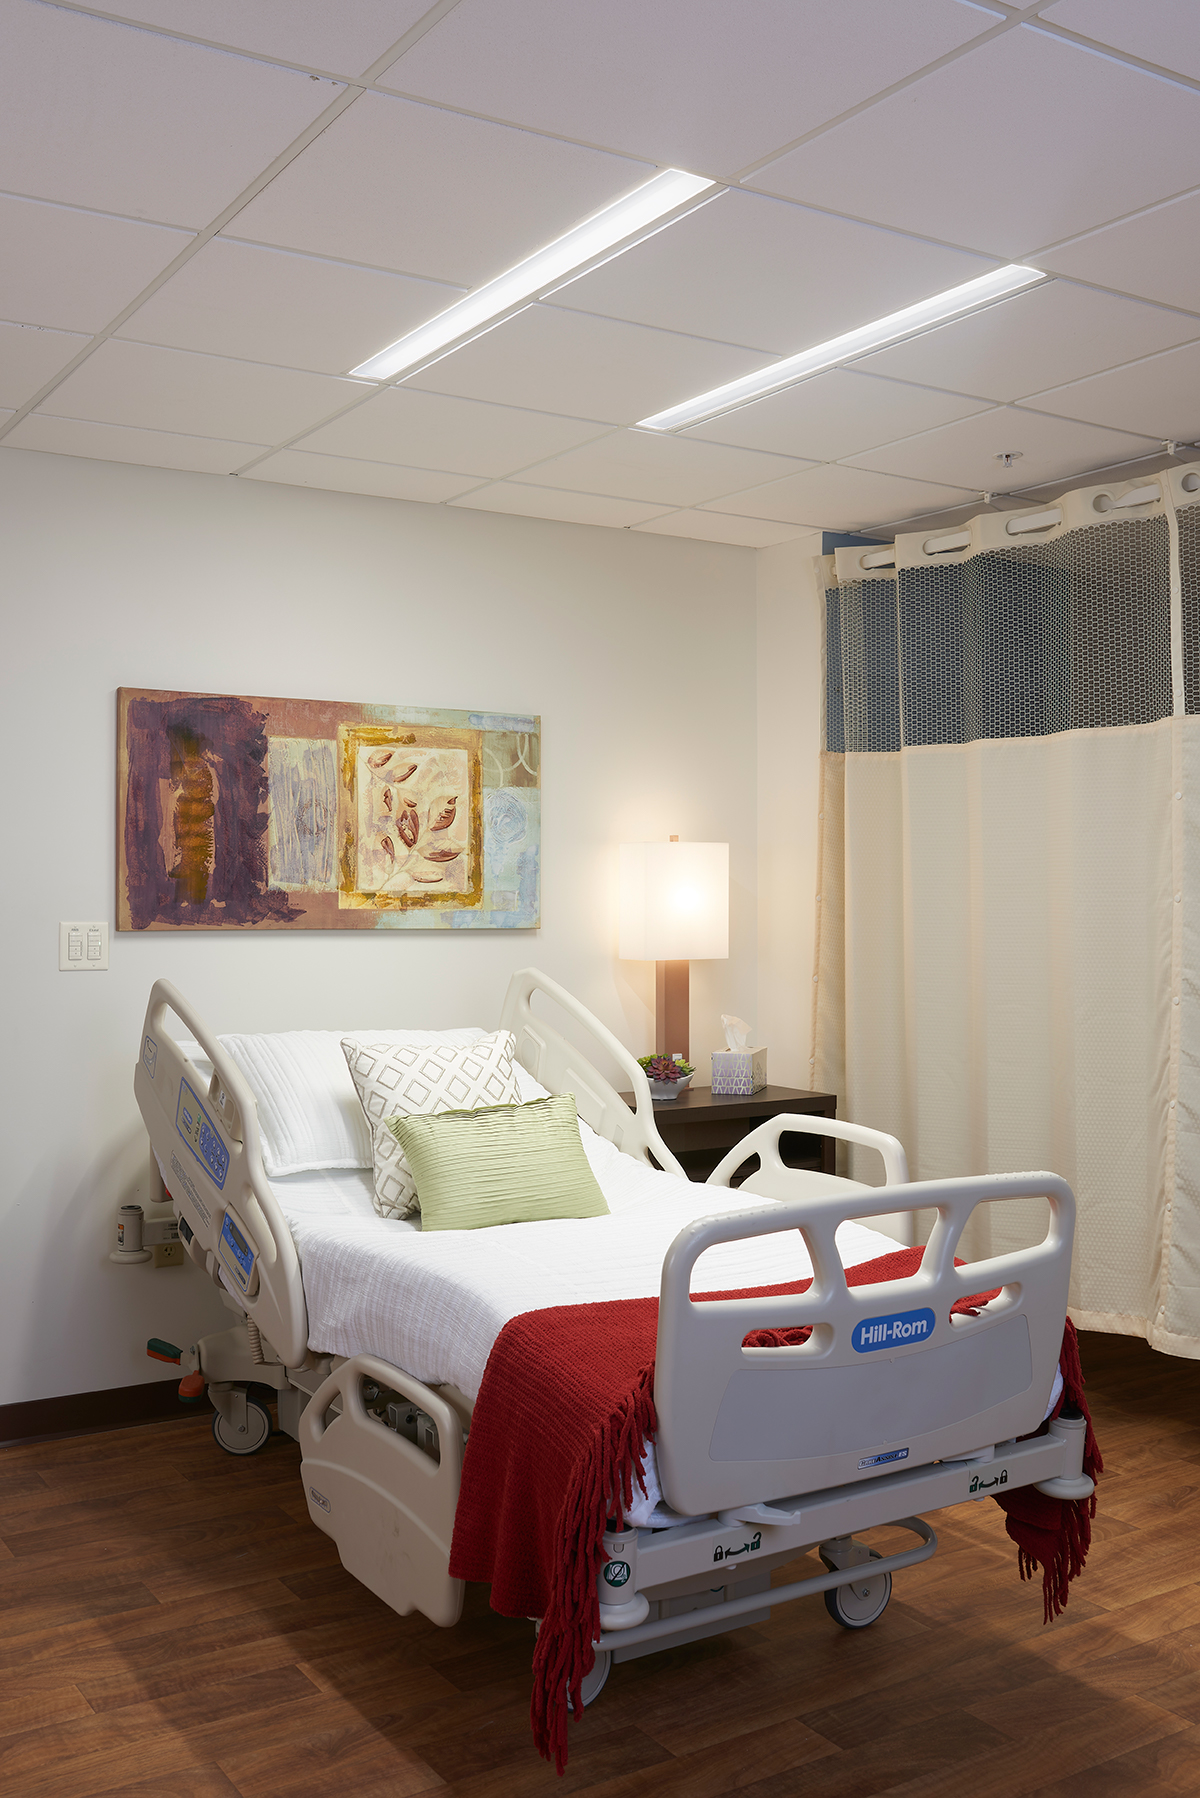 Lenga overbed slot luminaires in a patient room